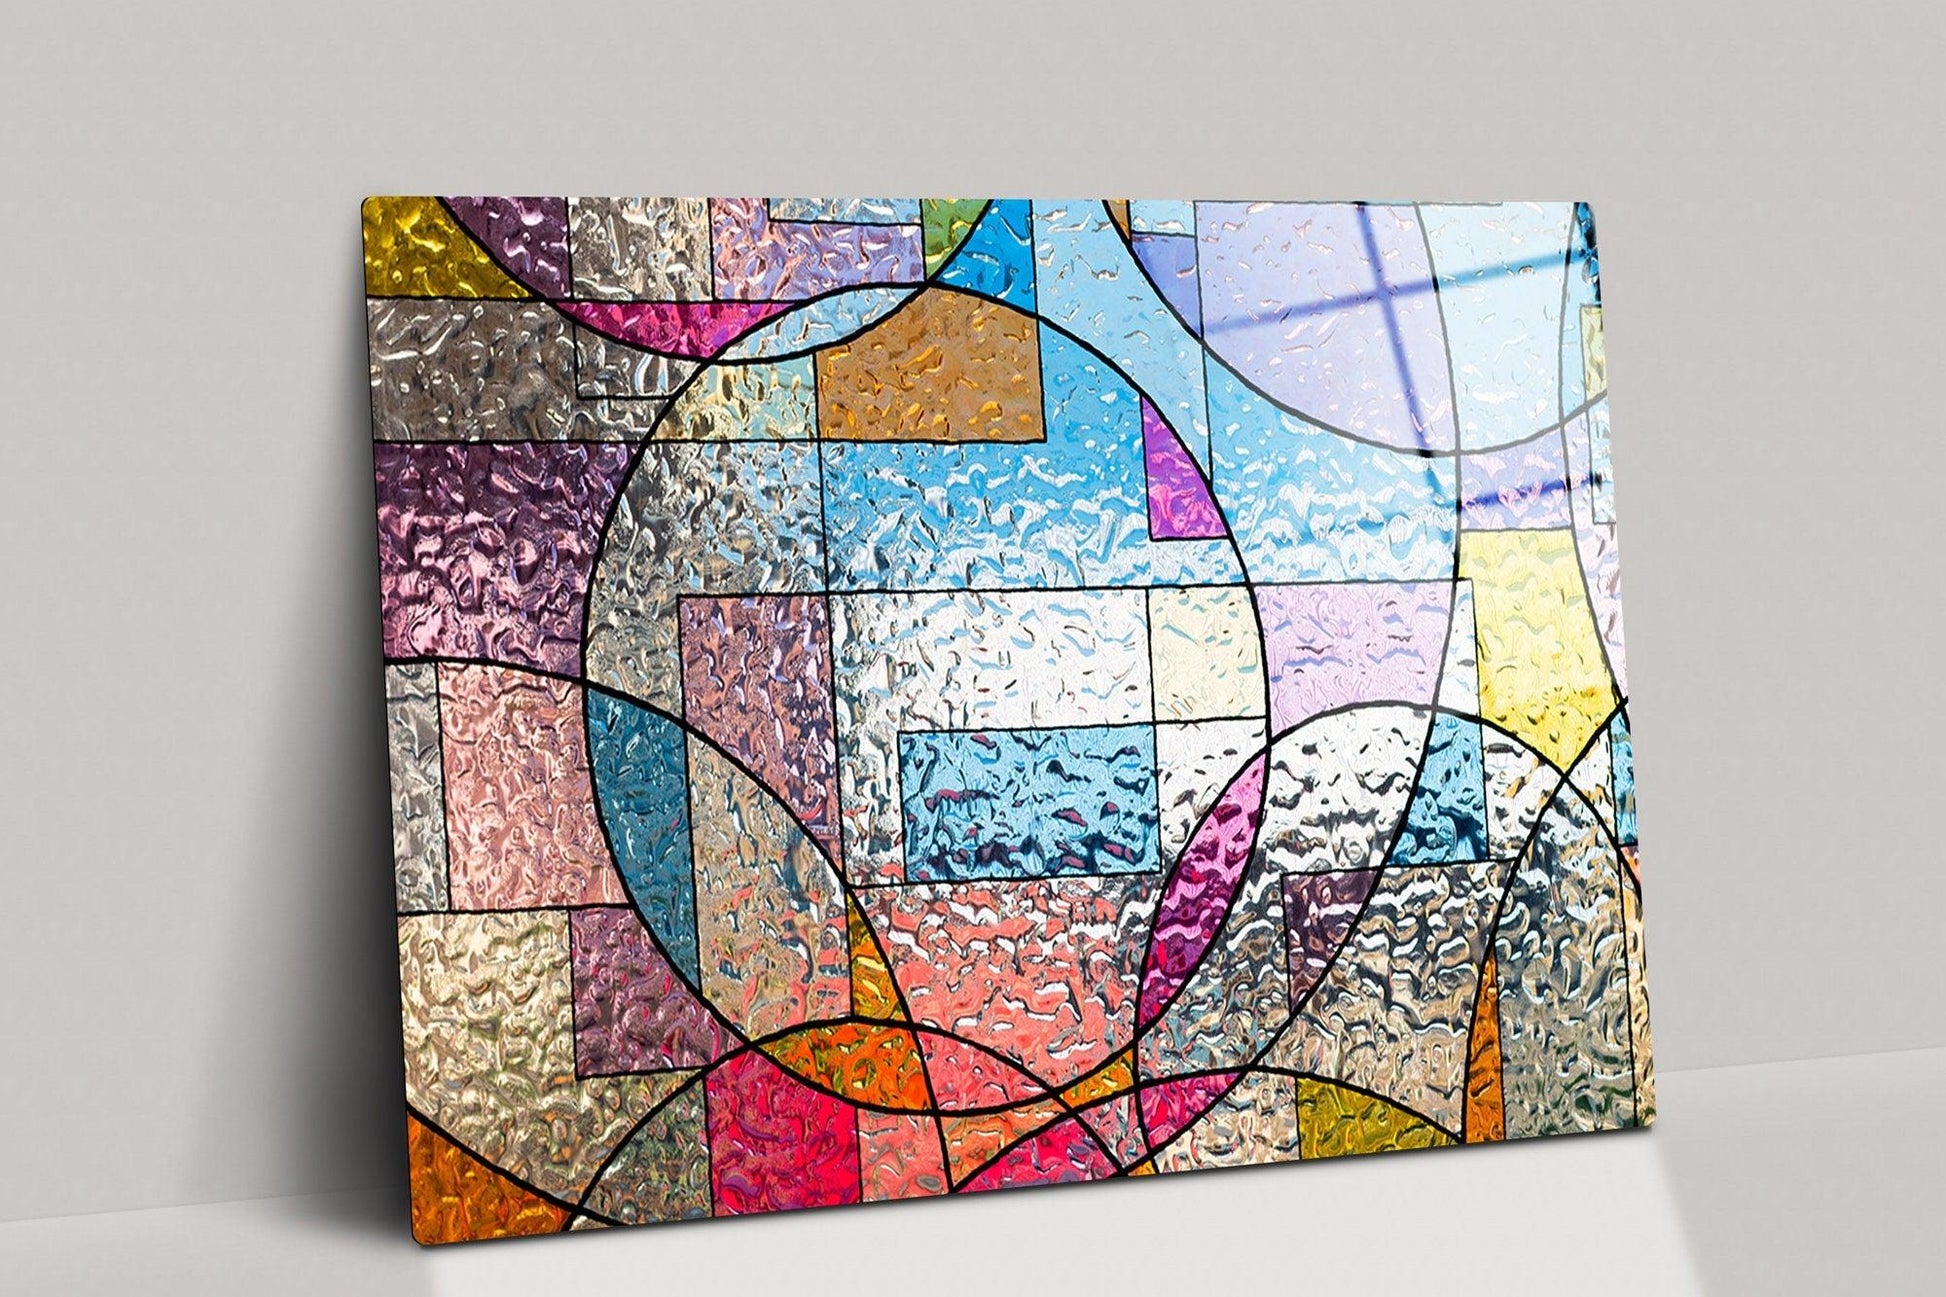 Designart 'Stained Glass Abstract Pattern' Contemporary Art on Wrapped Canvas Set - 36x28 - 3 Panels - 36 in. Wide x 28 in. High